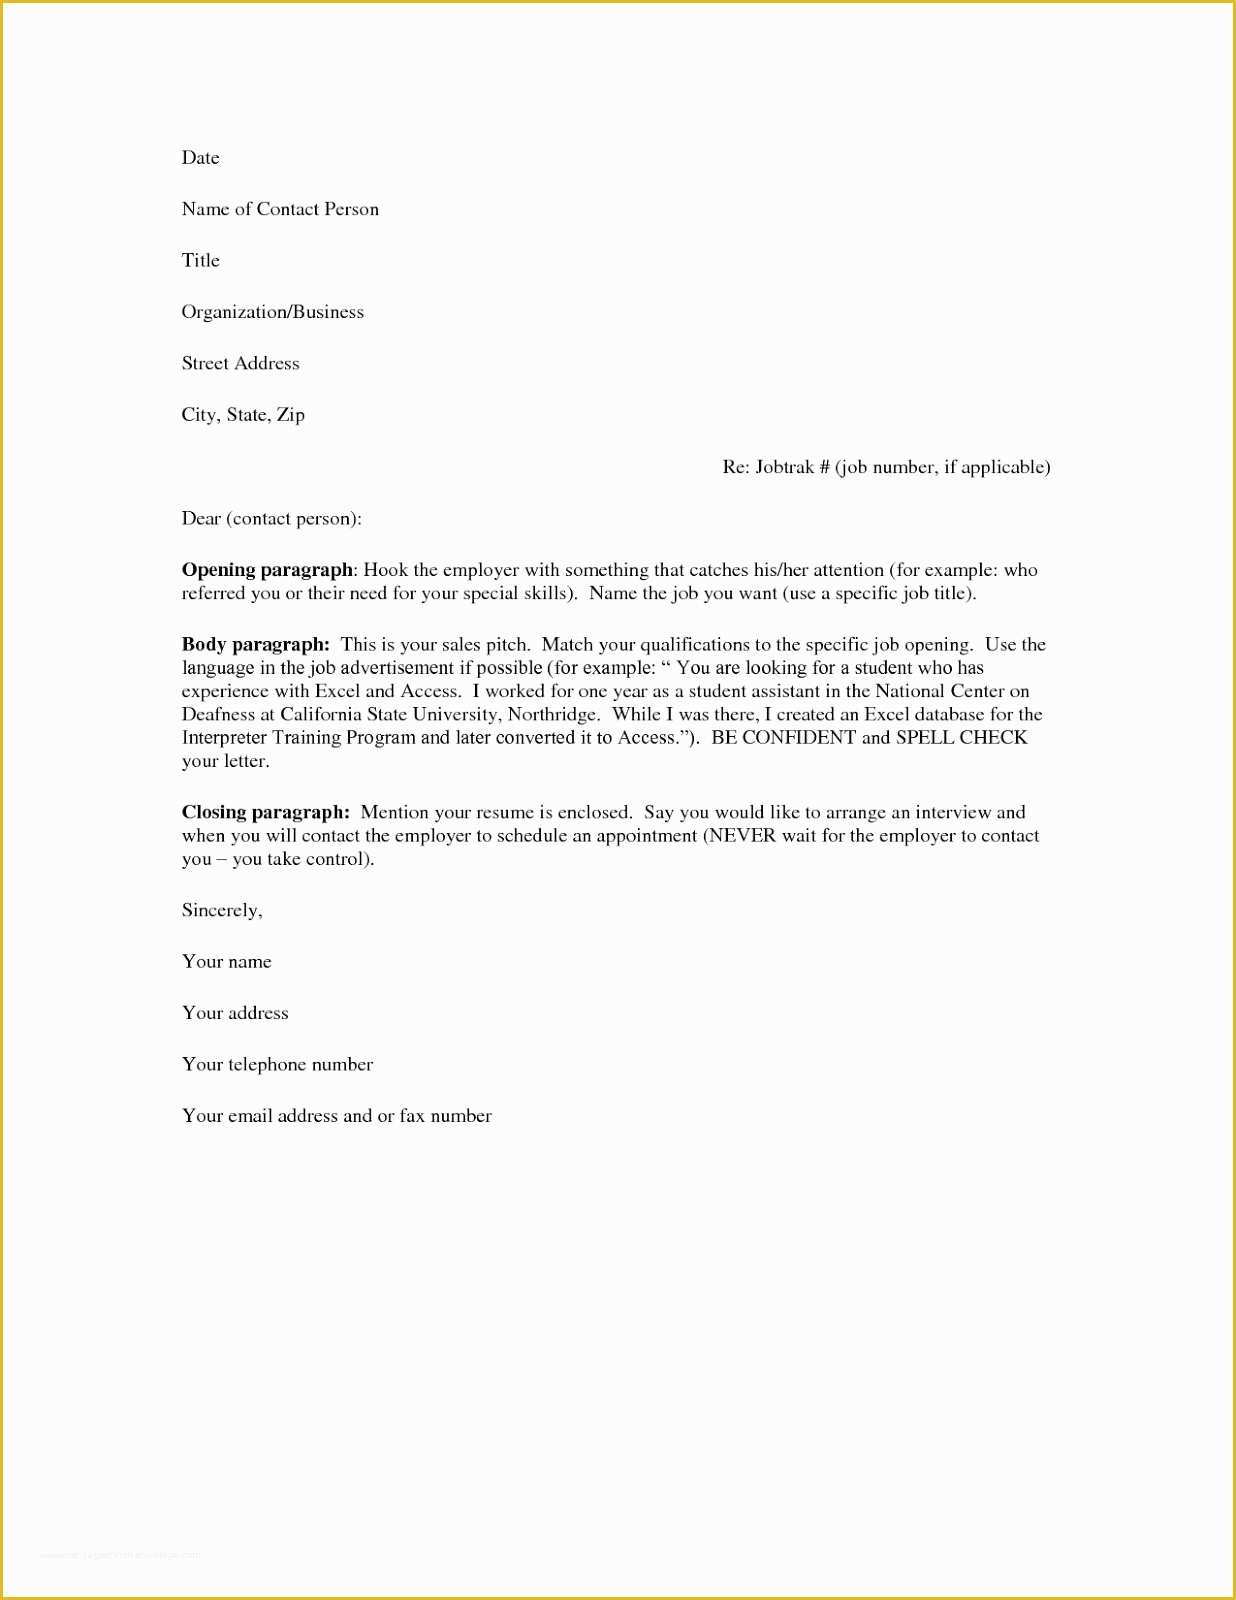 Free Resume Cover Letter Template Of Free Cover Letter Samples for Resumes